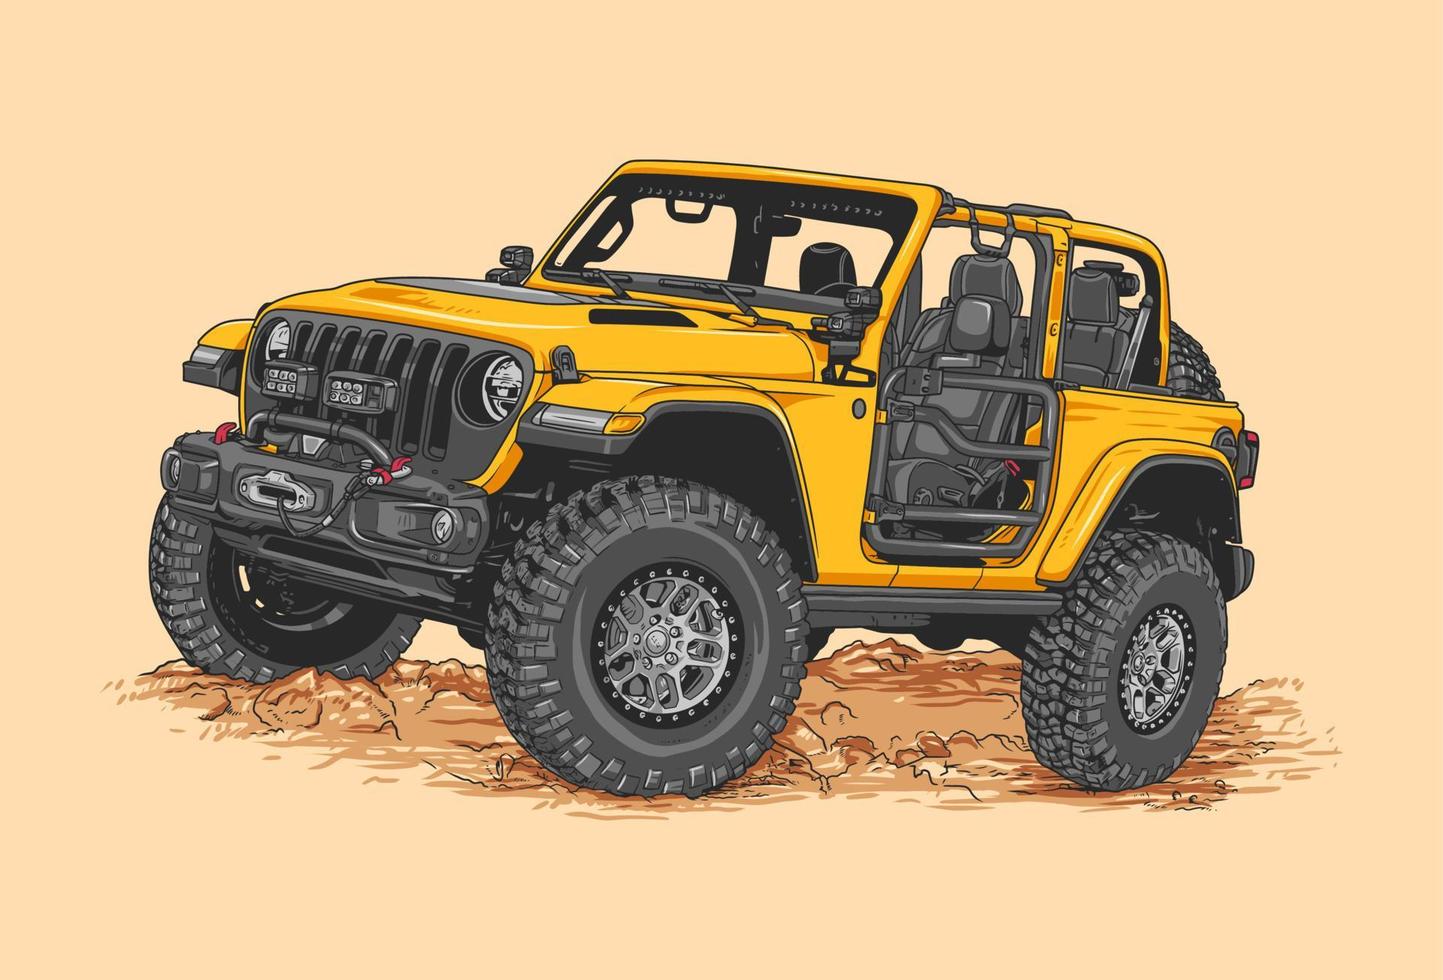 Open roof vehicle for adventure. Vector illustration